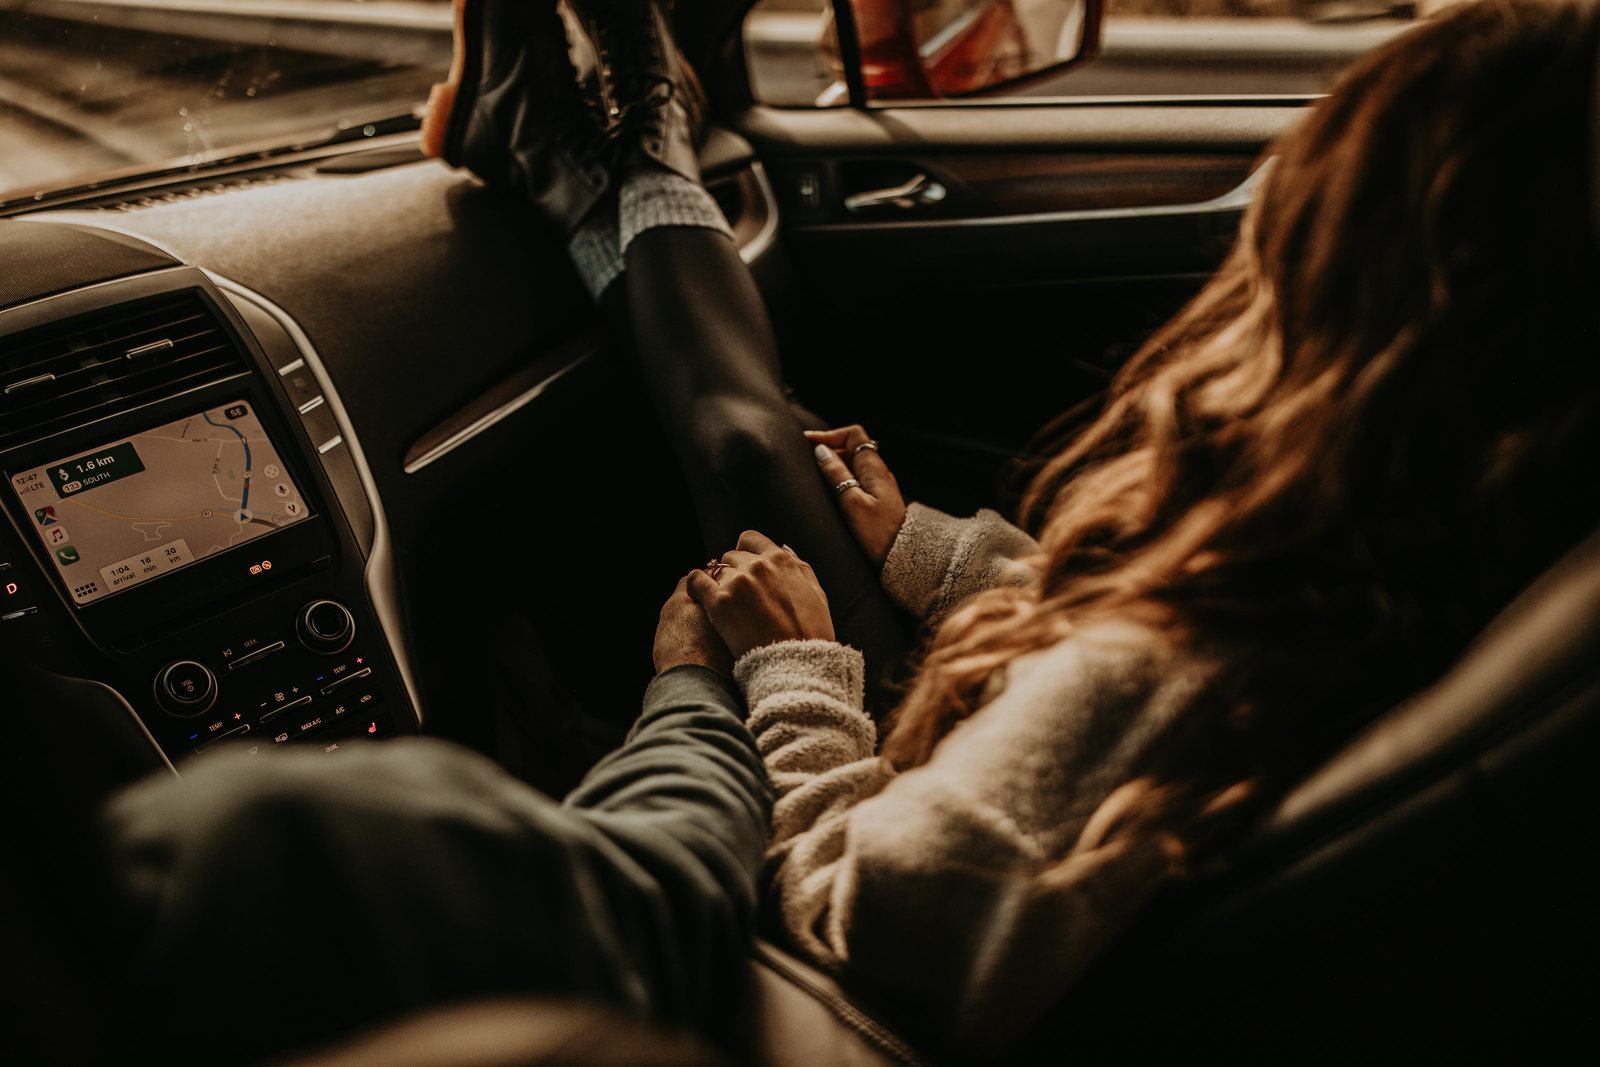 man and woman sitting in car holding hands